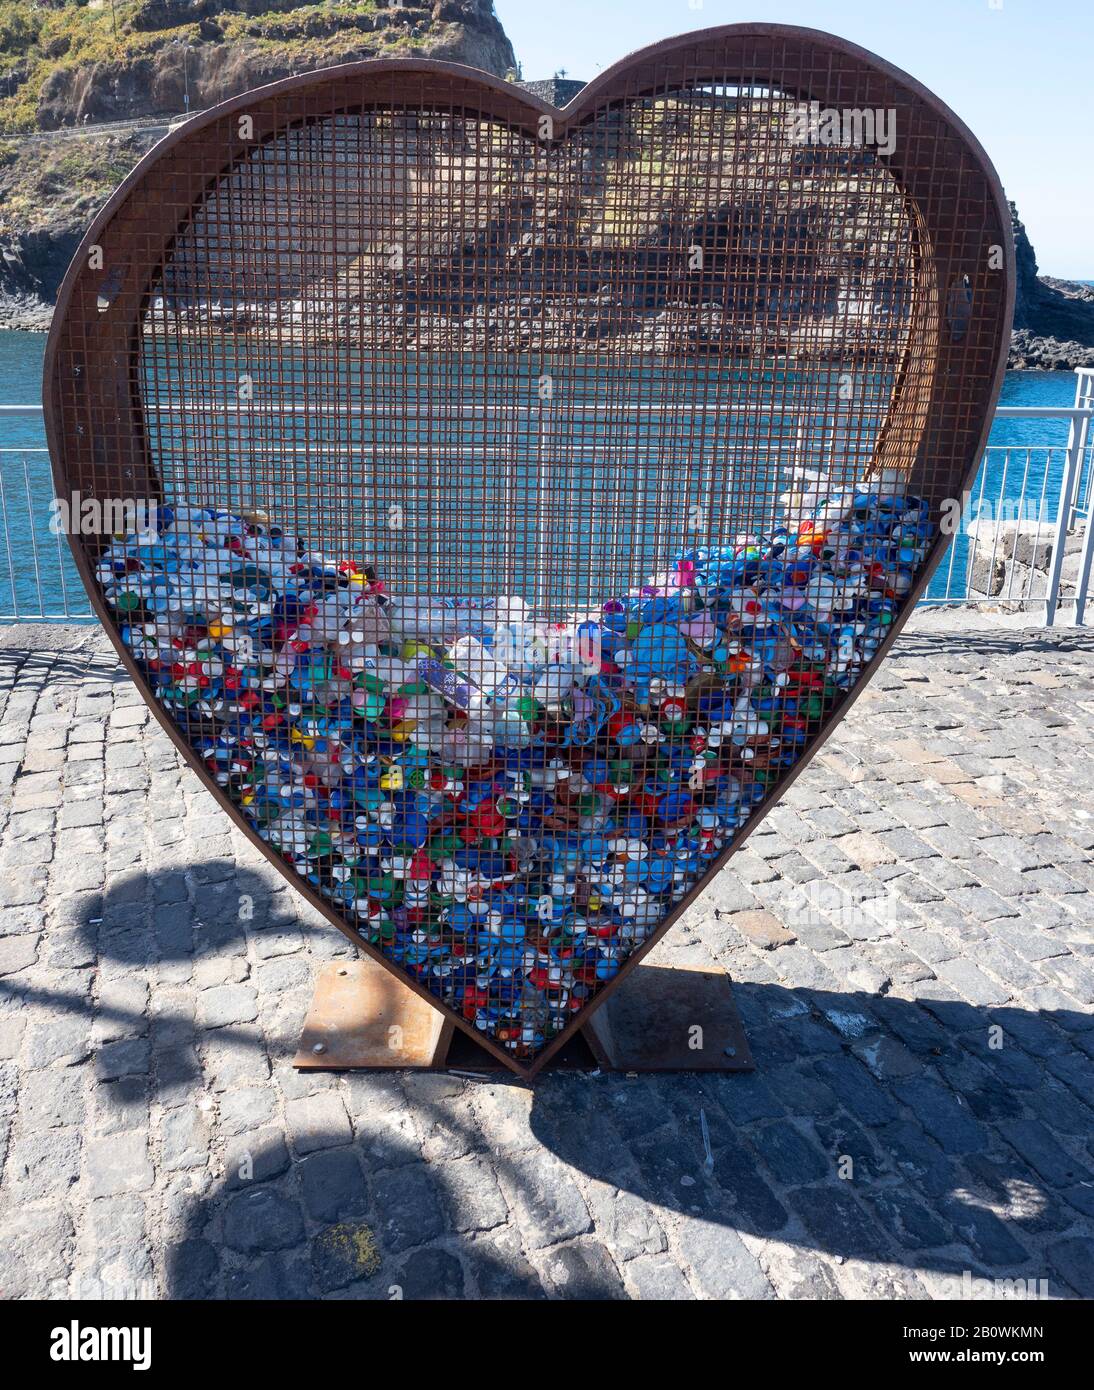 Recycling plastic bottle incentive Tenerife in the Canary Islands, Spain Stock Photo